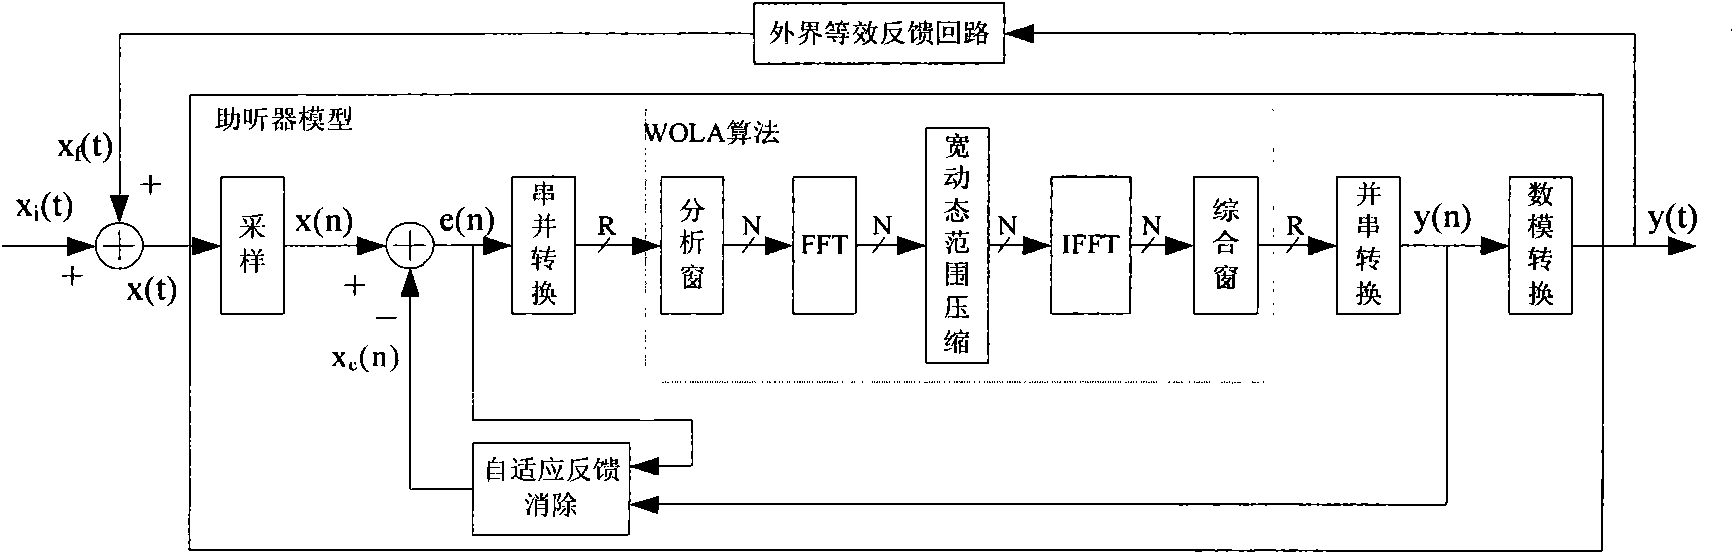 WOLA (Weighted-Overlap Add) filter bank based signal processing method for all-digital hearing aid